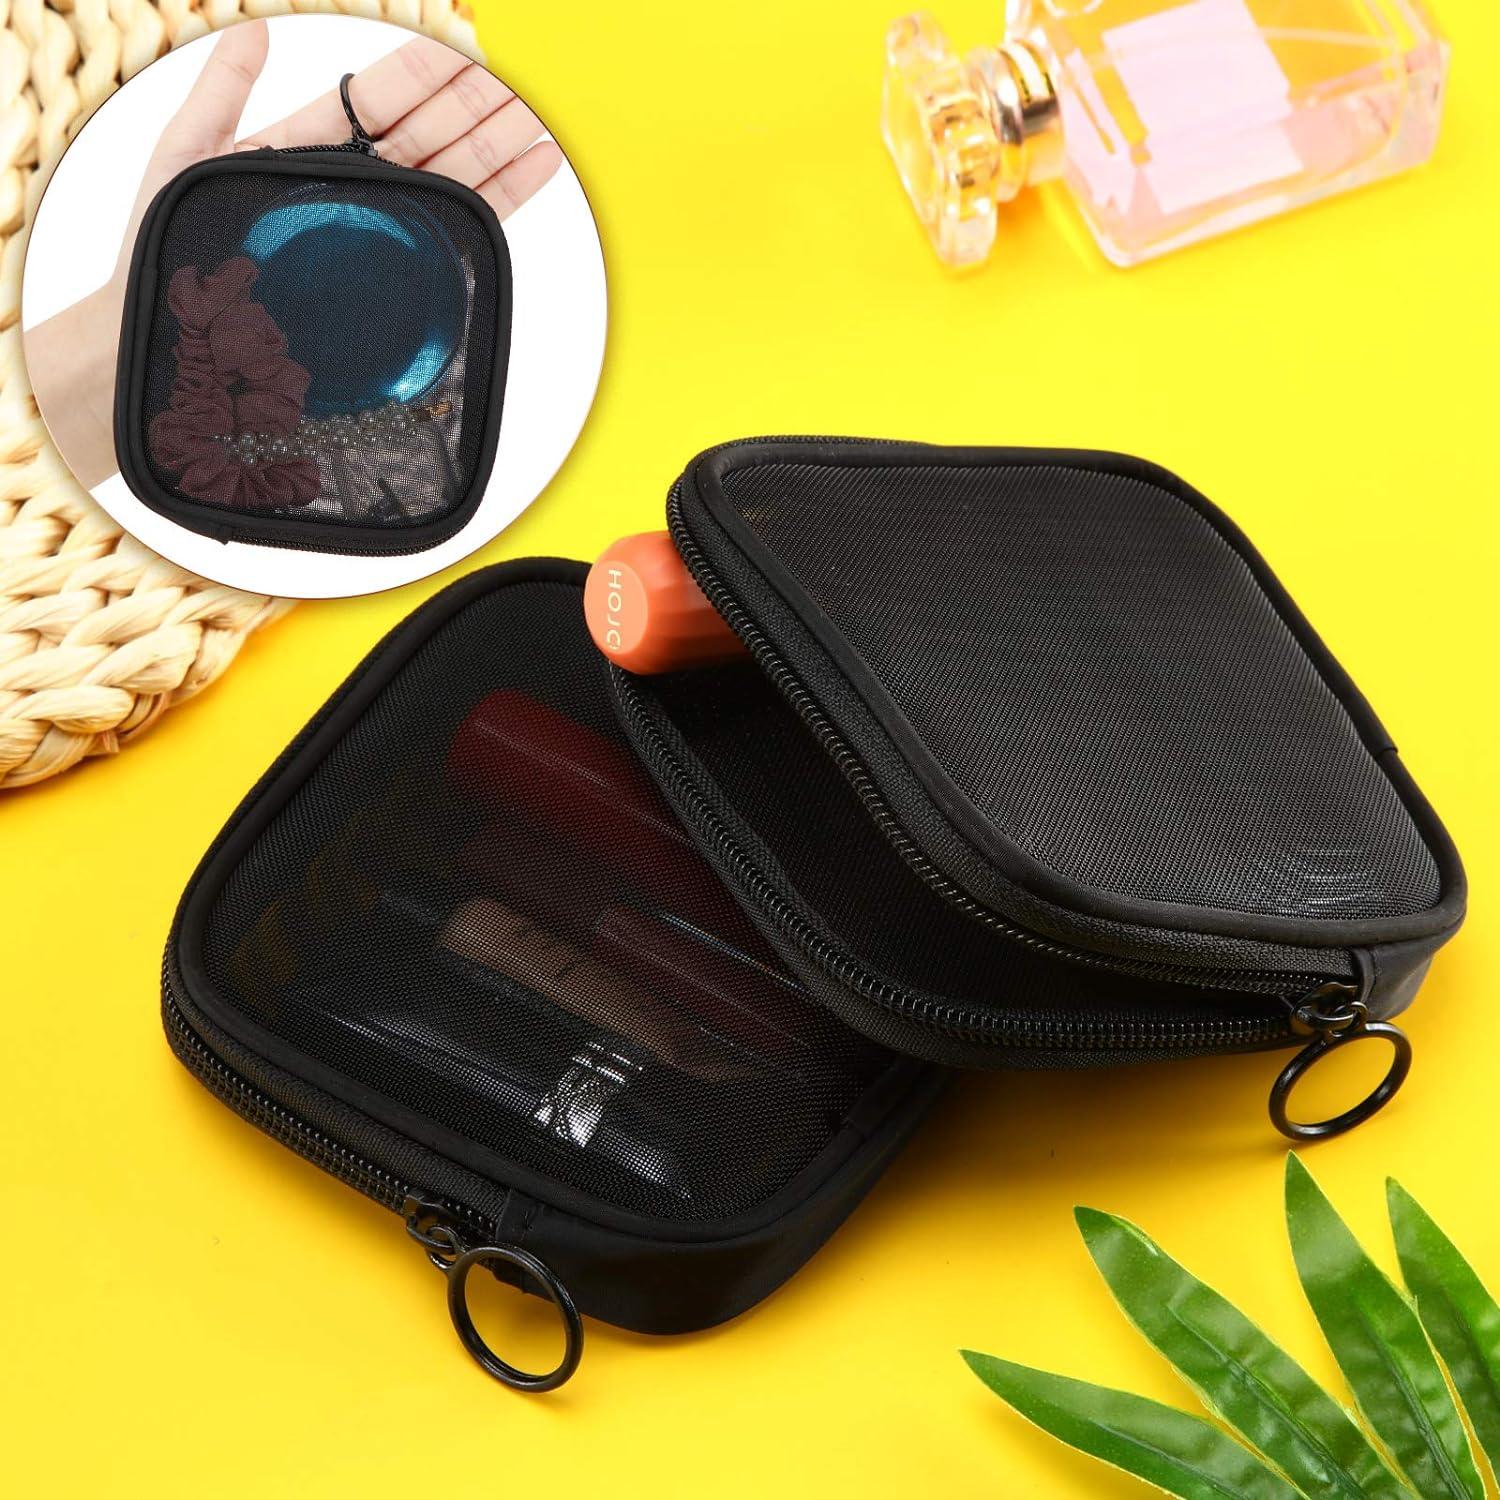 Weewooday 4 Pieces Mesh Makeup Bag Mesh Cosmetic Bag Travel Toiletry Bag  Pouch with Zipper Mini Portable Makeup Cosmetic Travel Toiletry Purse Bag  for Daily Toiletries Accessories (Black Small) Black 4.52x4.52x0.78 Inch (